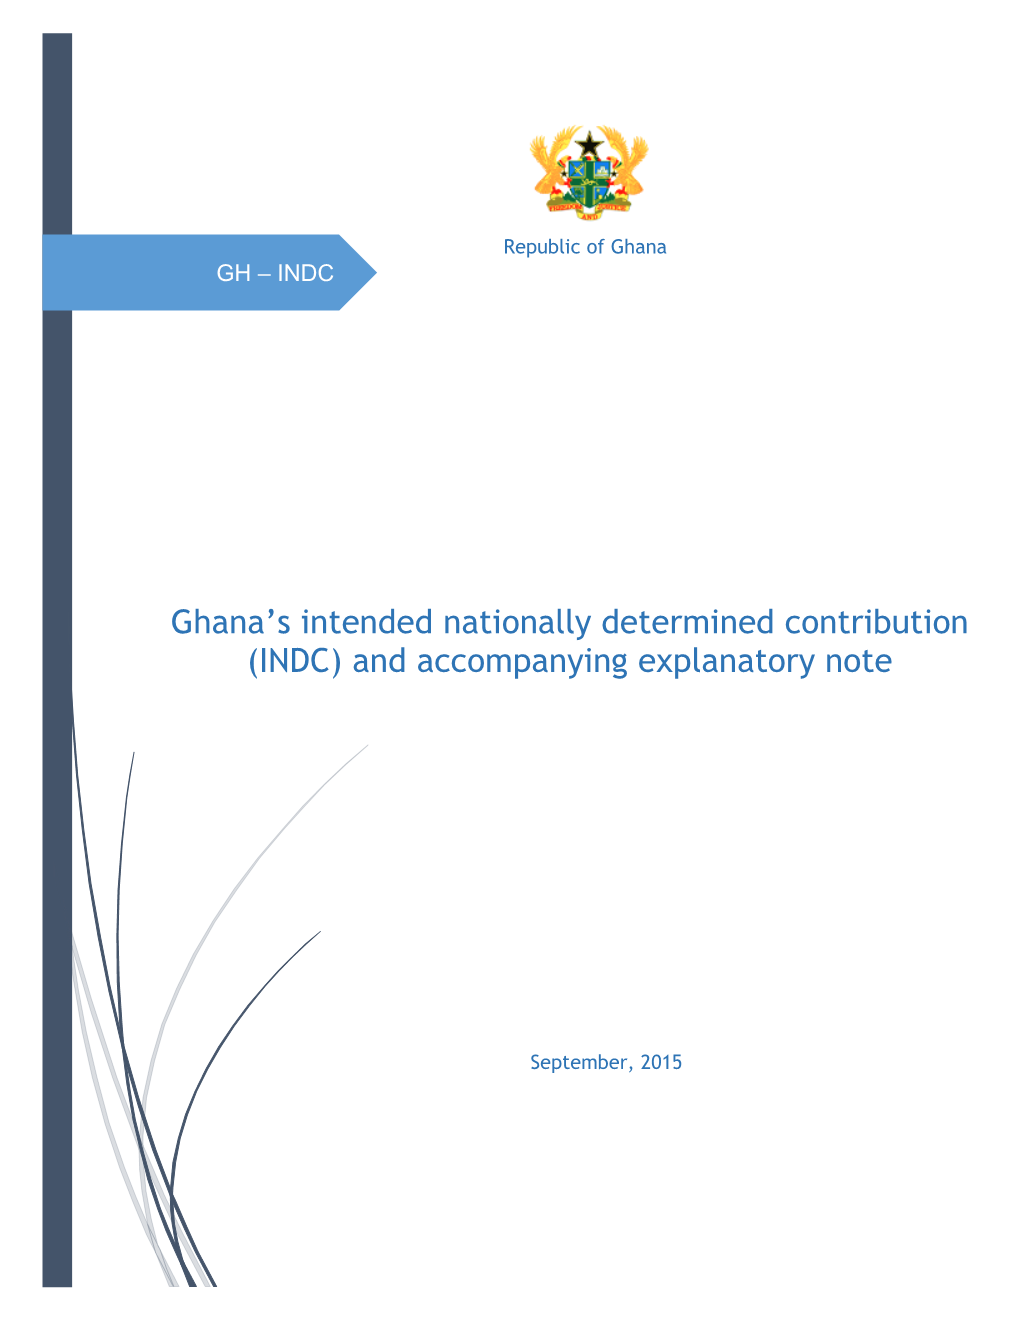 Ghana’S Intended Nationally Determined Contribution (INDC) and Accompanying Explanatory Note